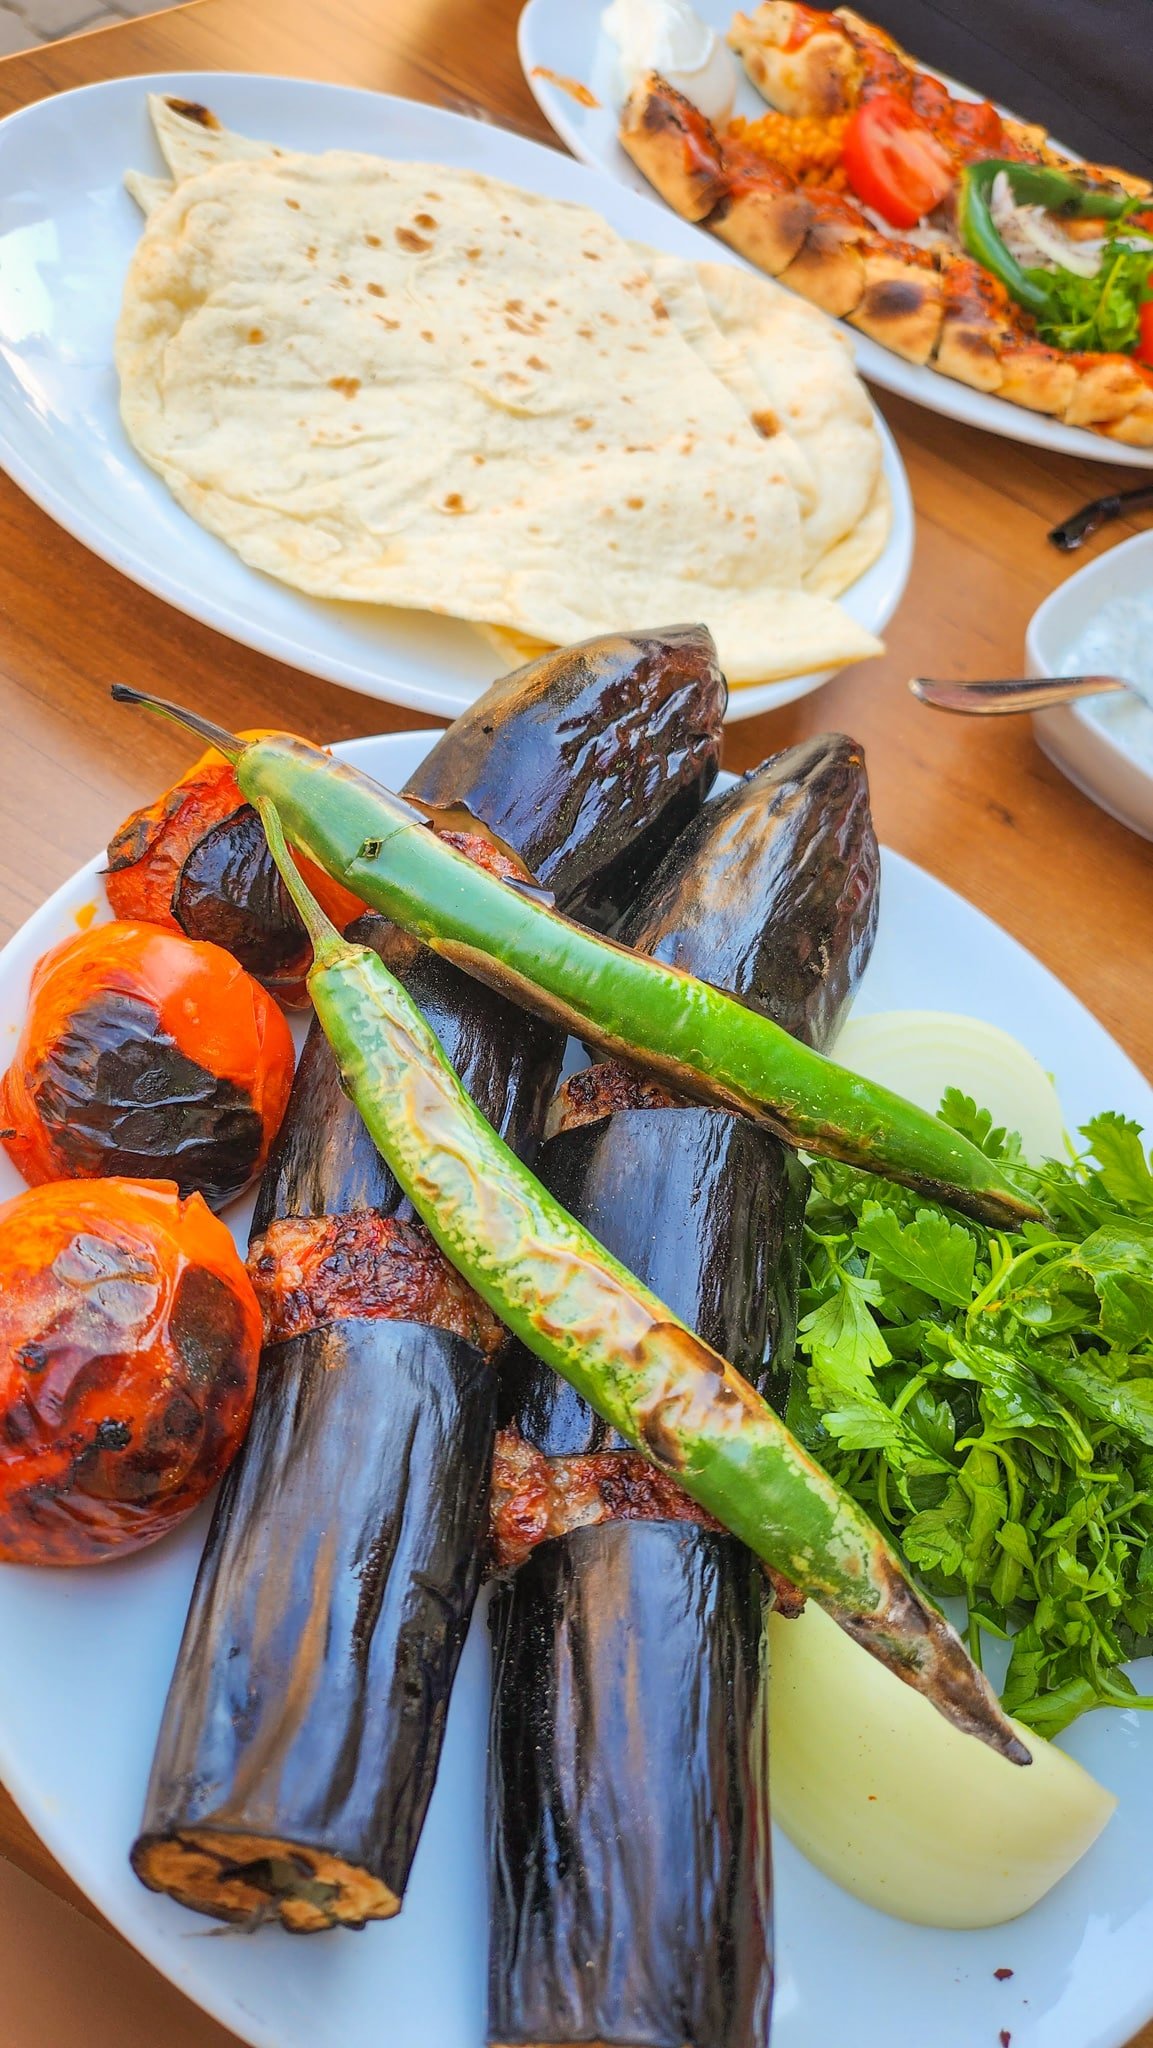 Grilled eggplants, tomatoes, green chilies, and a whole onion, served with fresh herbs and flatbread on wooden tables alongside the best Turkish kebabs.